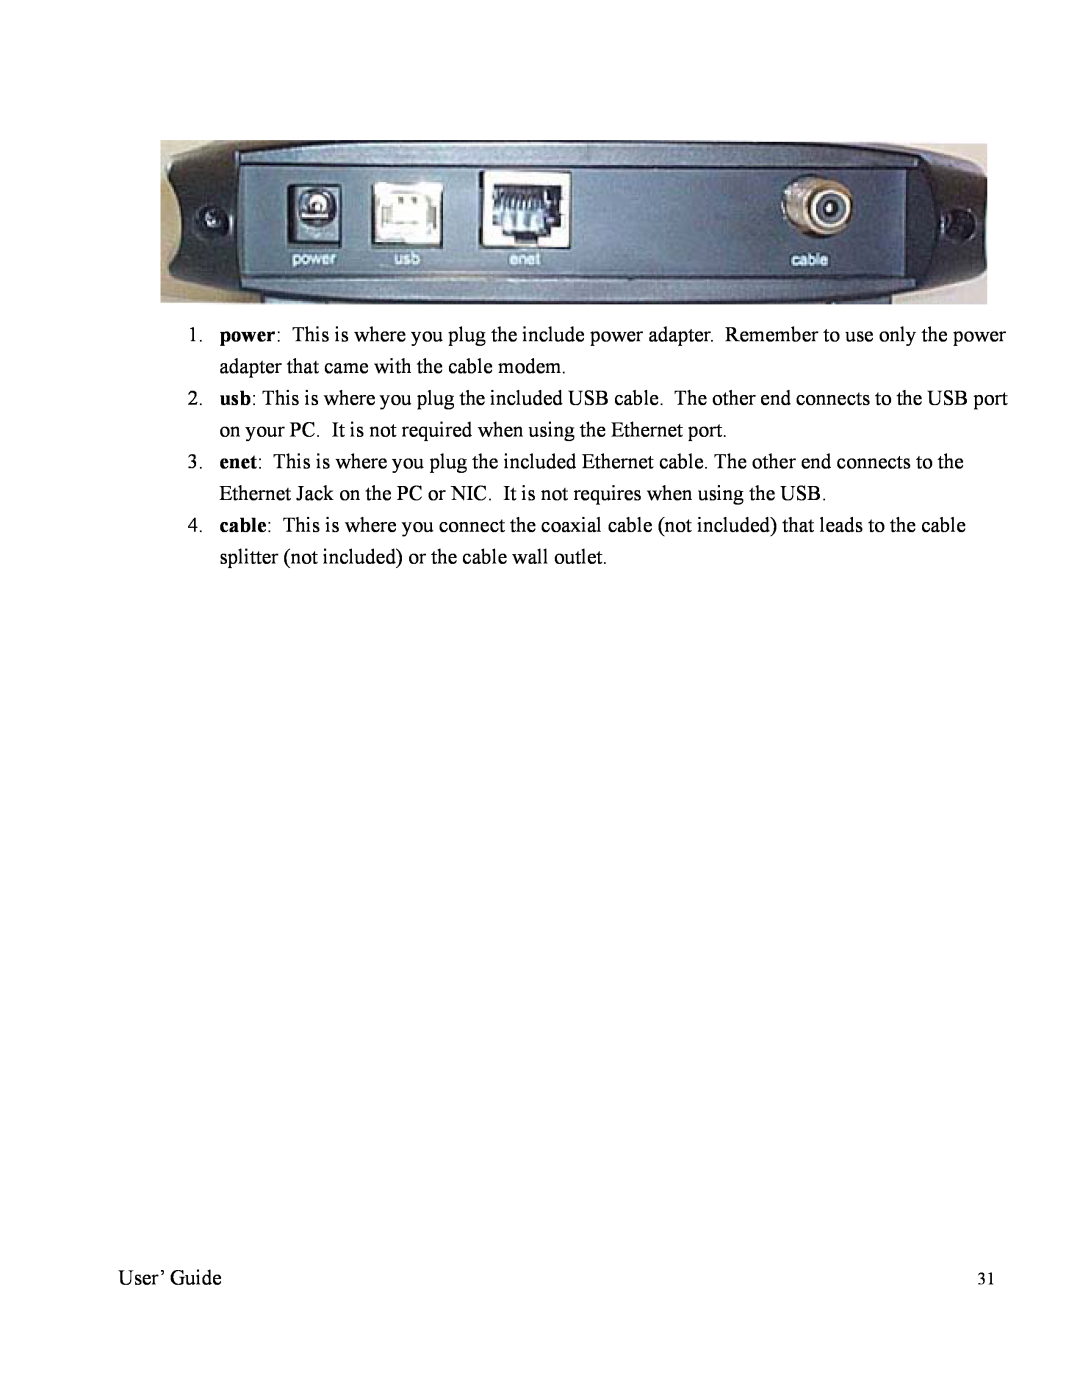 Orion 2000 manual User’ Guide 